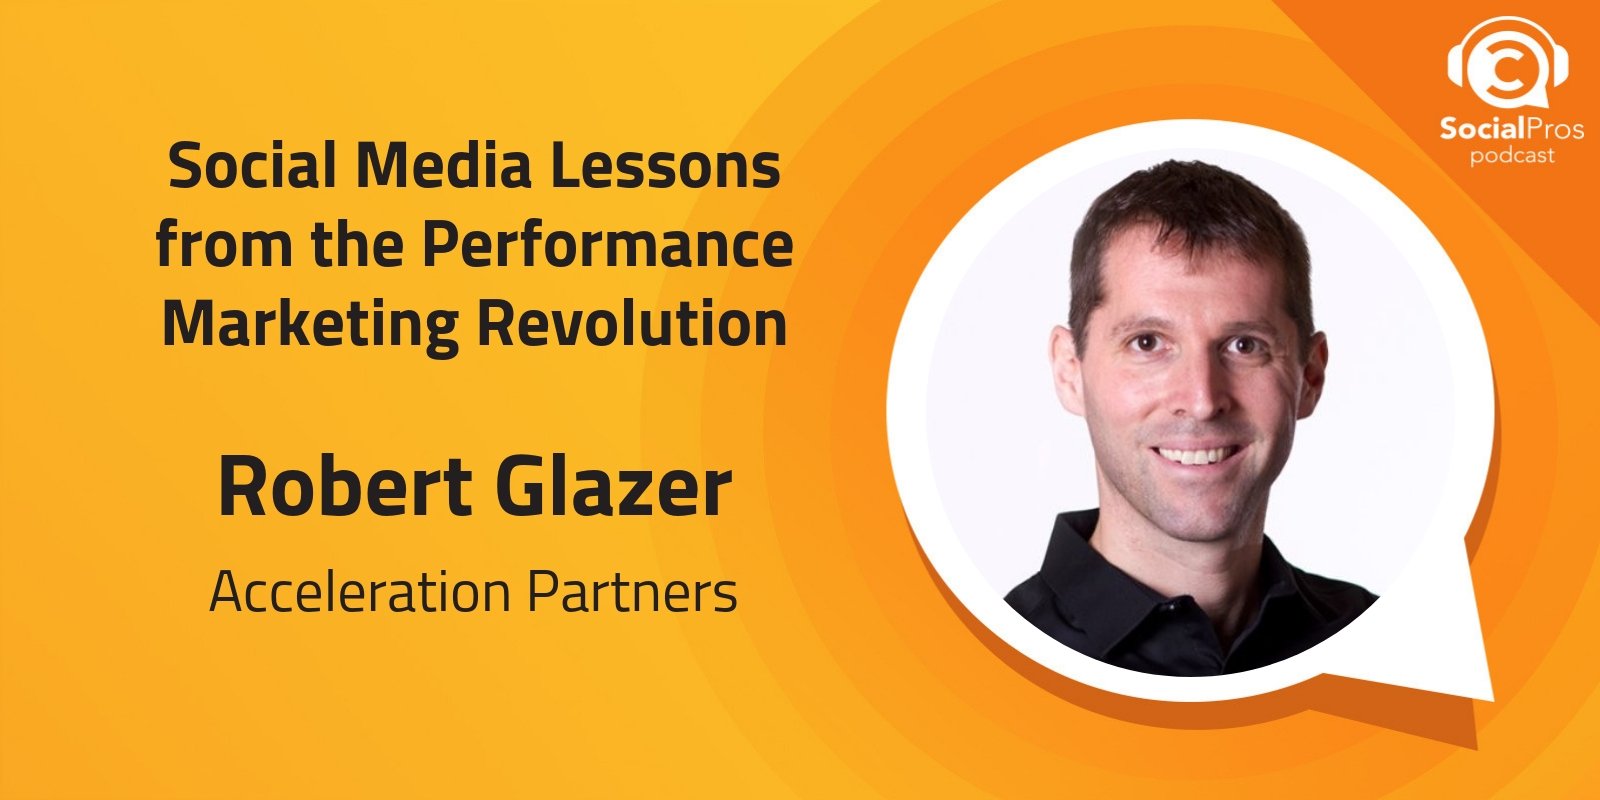 Social Media Lessons from the Performance Marketing Revolution